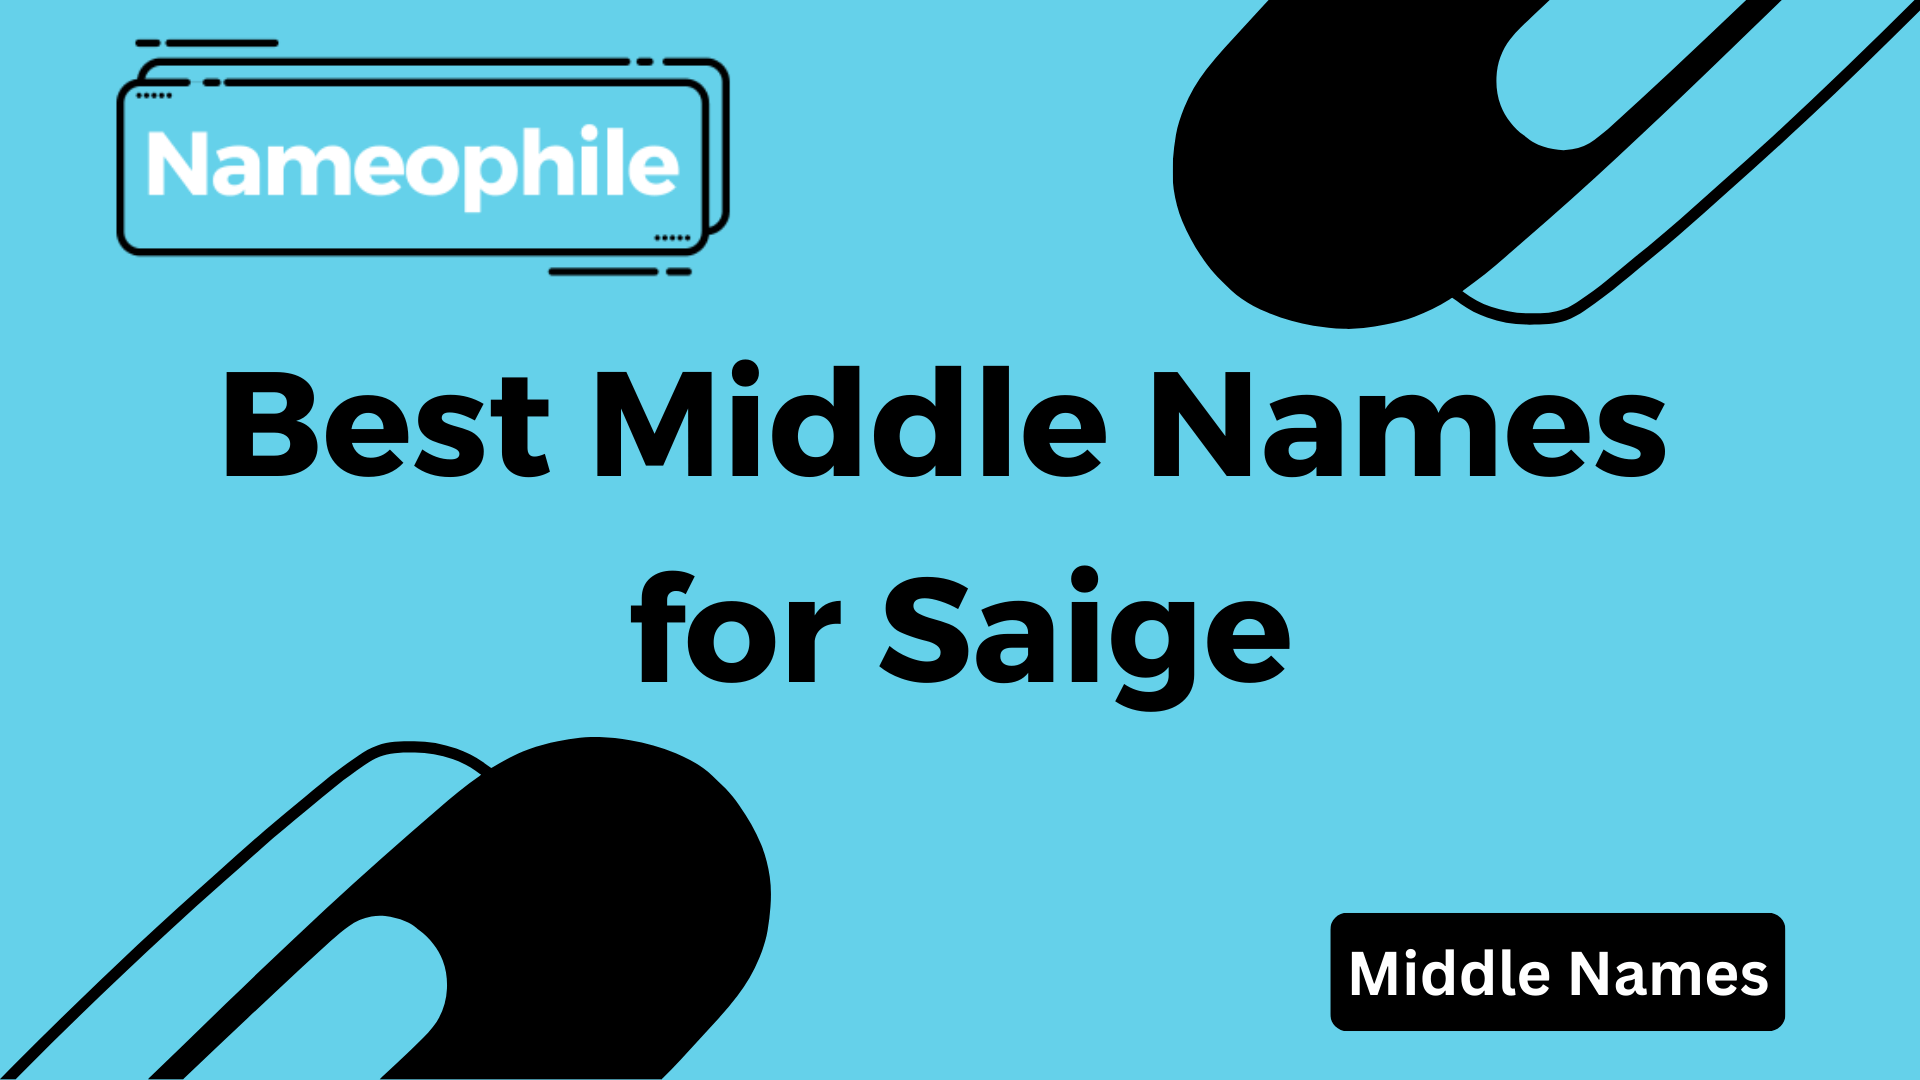 Best Middle Names for Saige (1)